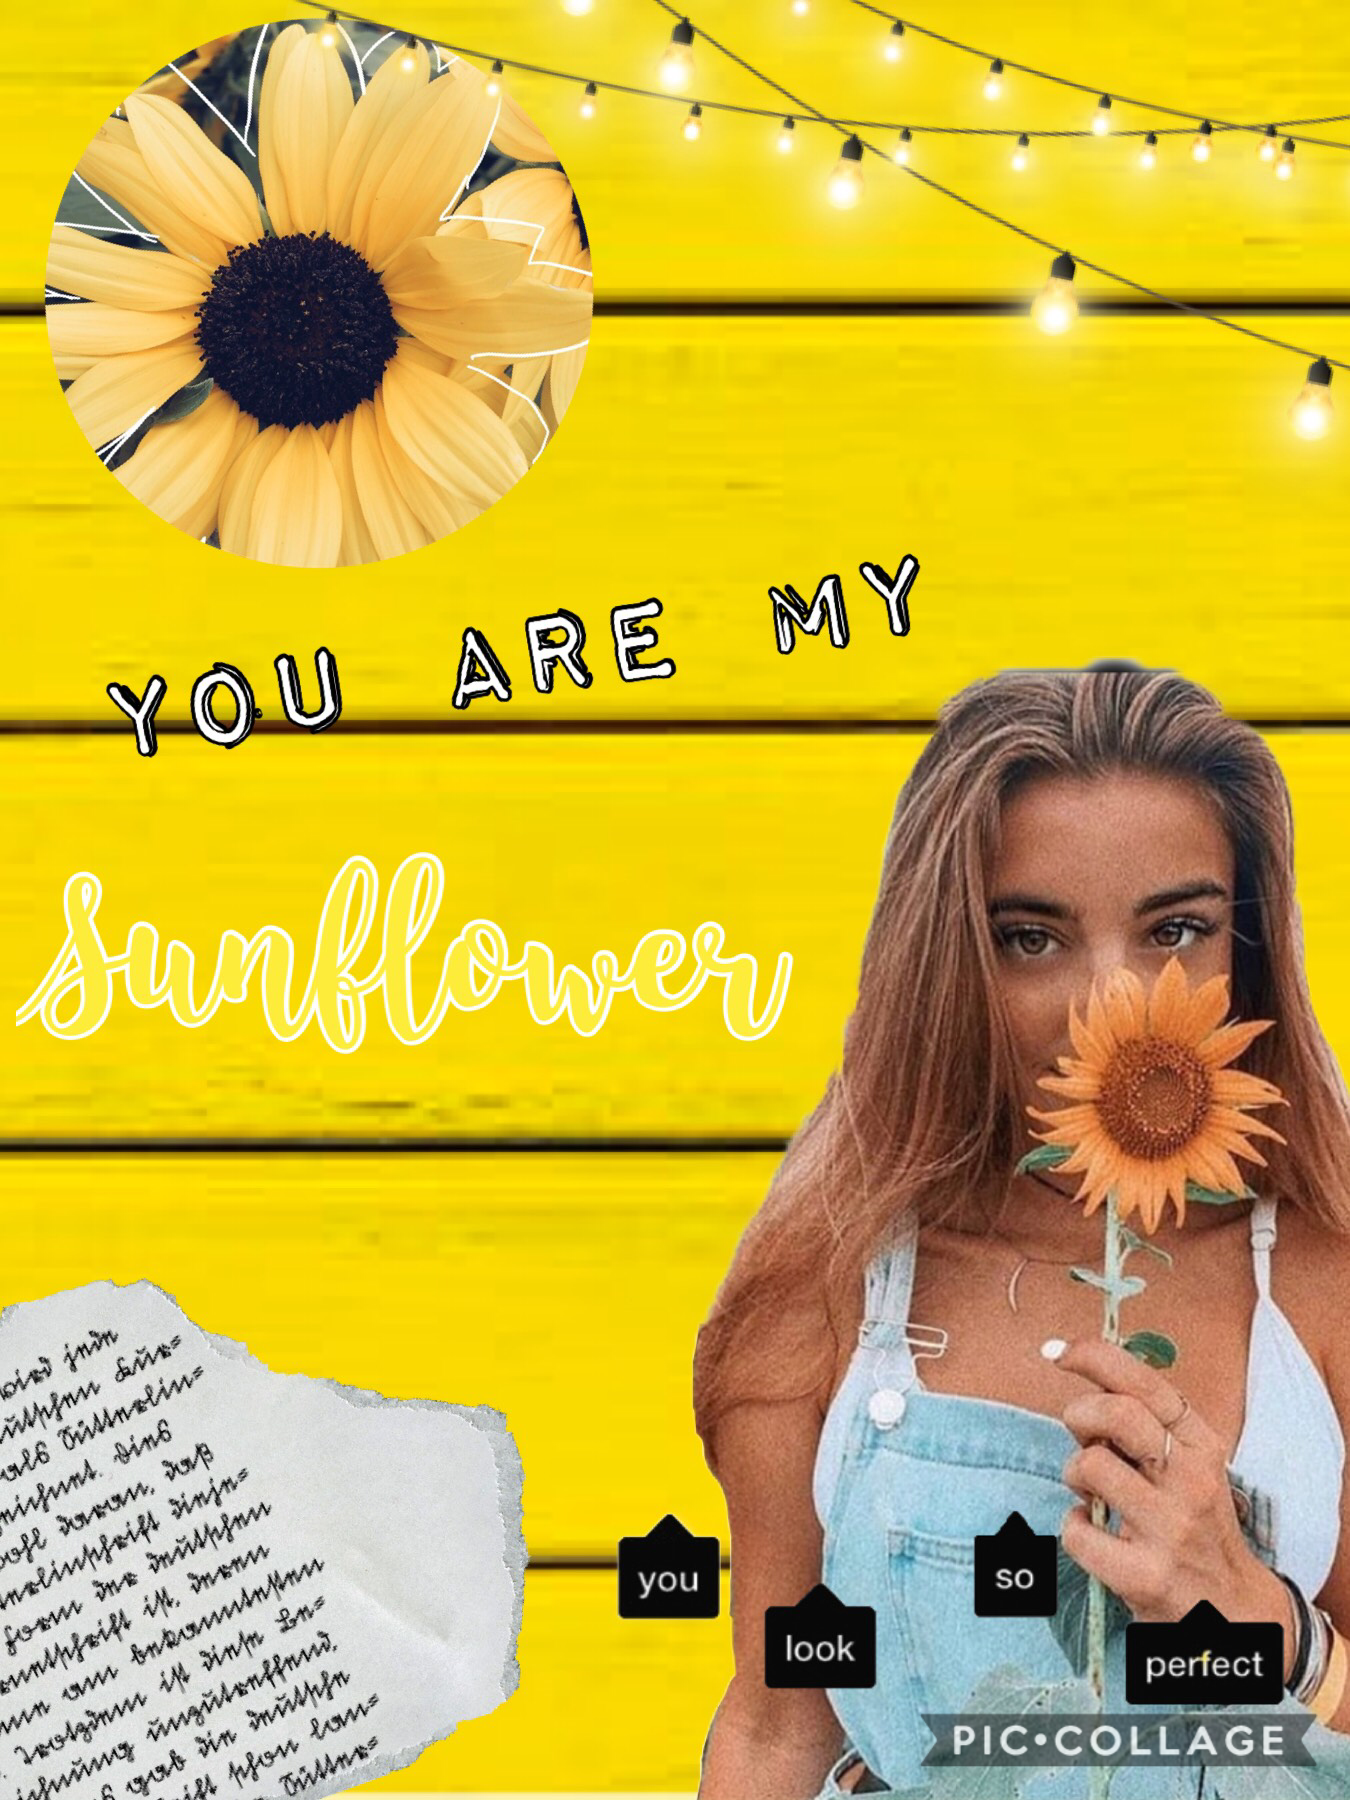 Sunflower vibes! This is a very special symbol to me (you may see I used it a lot!) because a sunflower represents my loved grandad who I love soo much! We lost him a few years ago but he will always be remembered! Every year (the anniversary of death dat